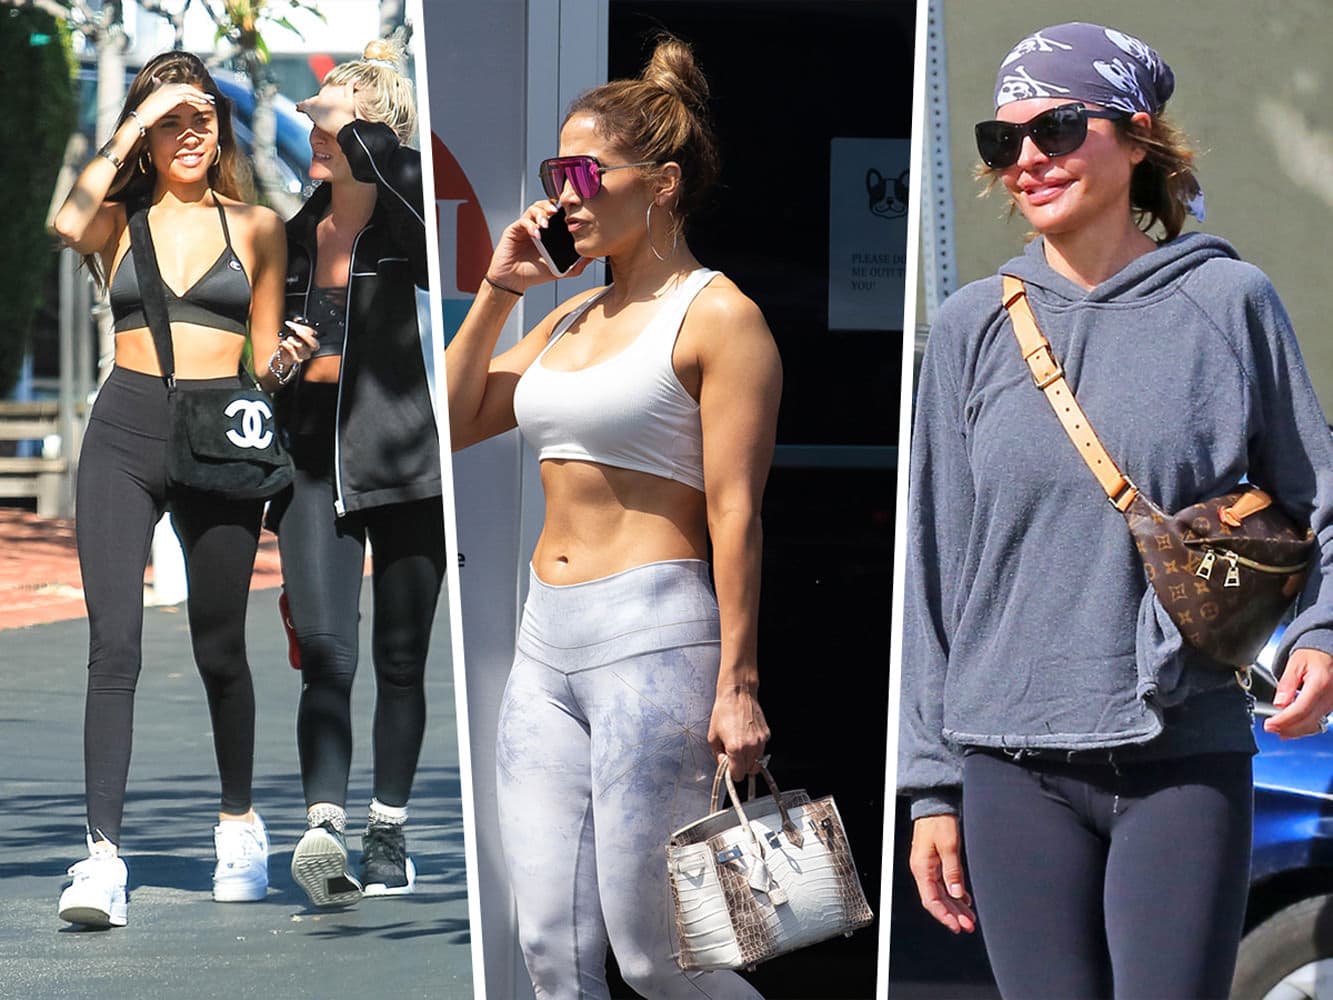 Madison Beer models crop top and Louis Vuitton bag out in LA